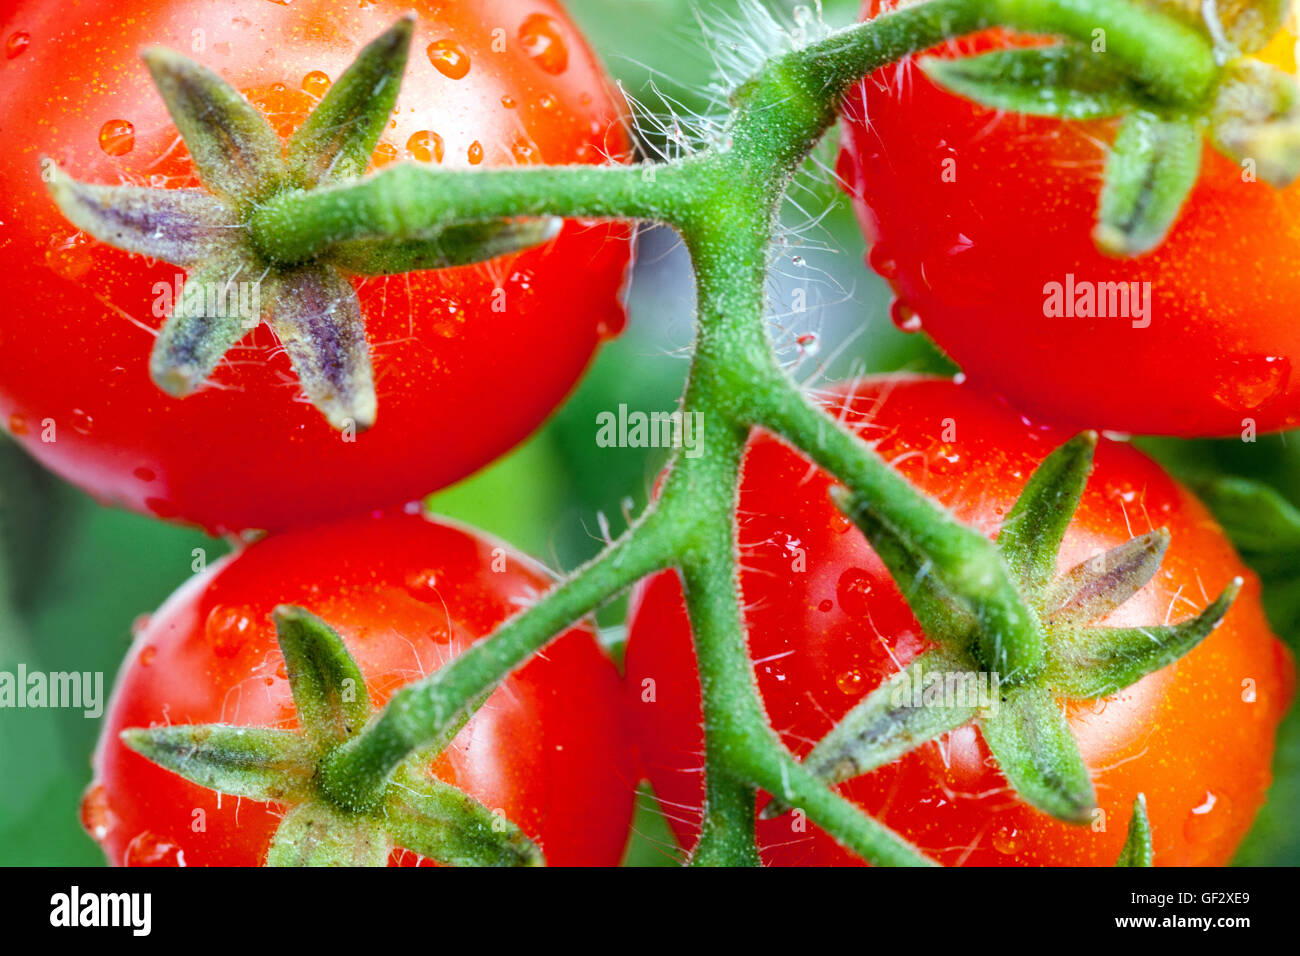 Tomates cerises naines tomate Banque D'Images